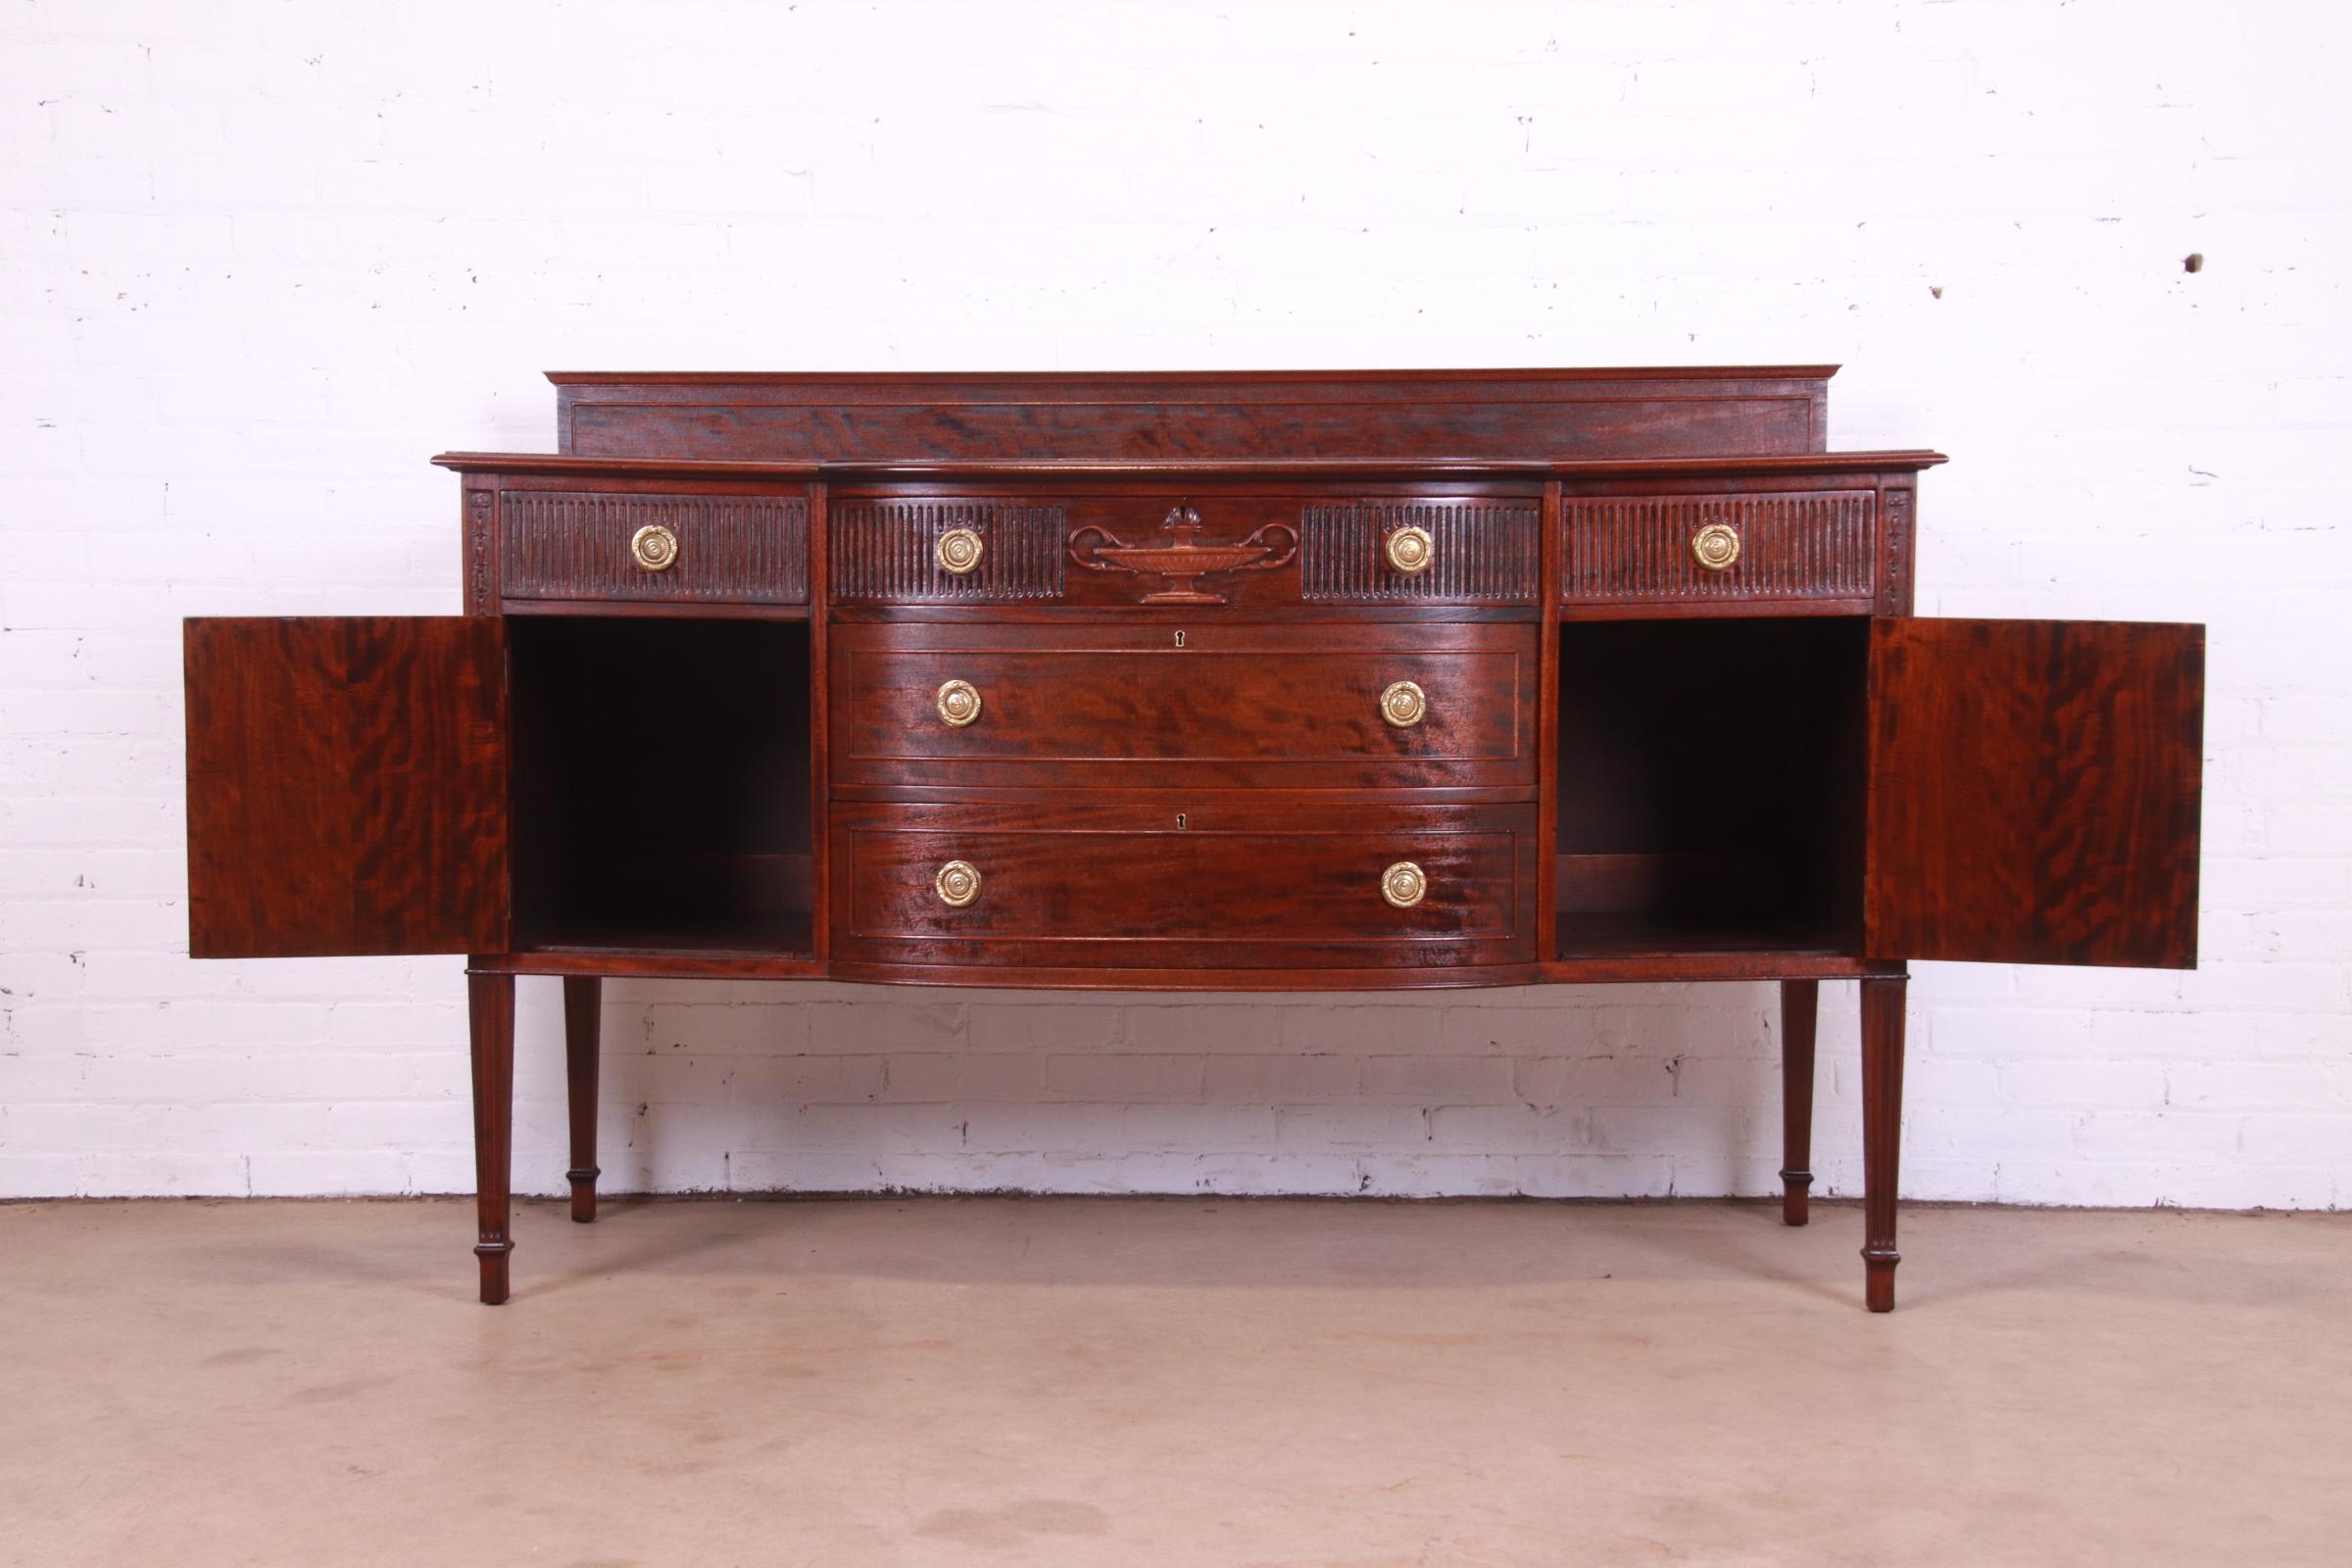 Antique French Regency Louis XVI Style Carved Mahogany Sideboard or Bar Cabinet For Sale 9